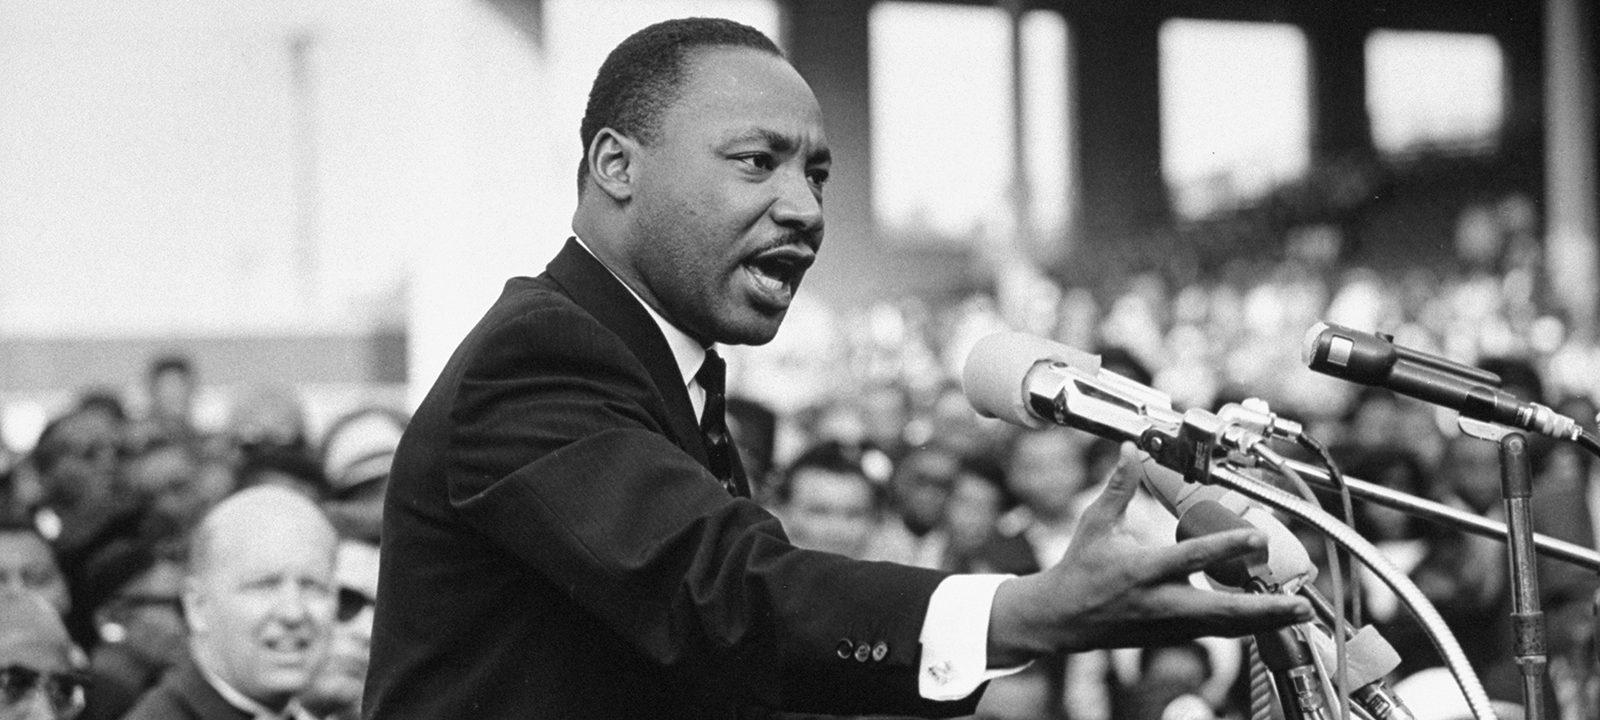 Martin Luther King Day